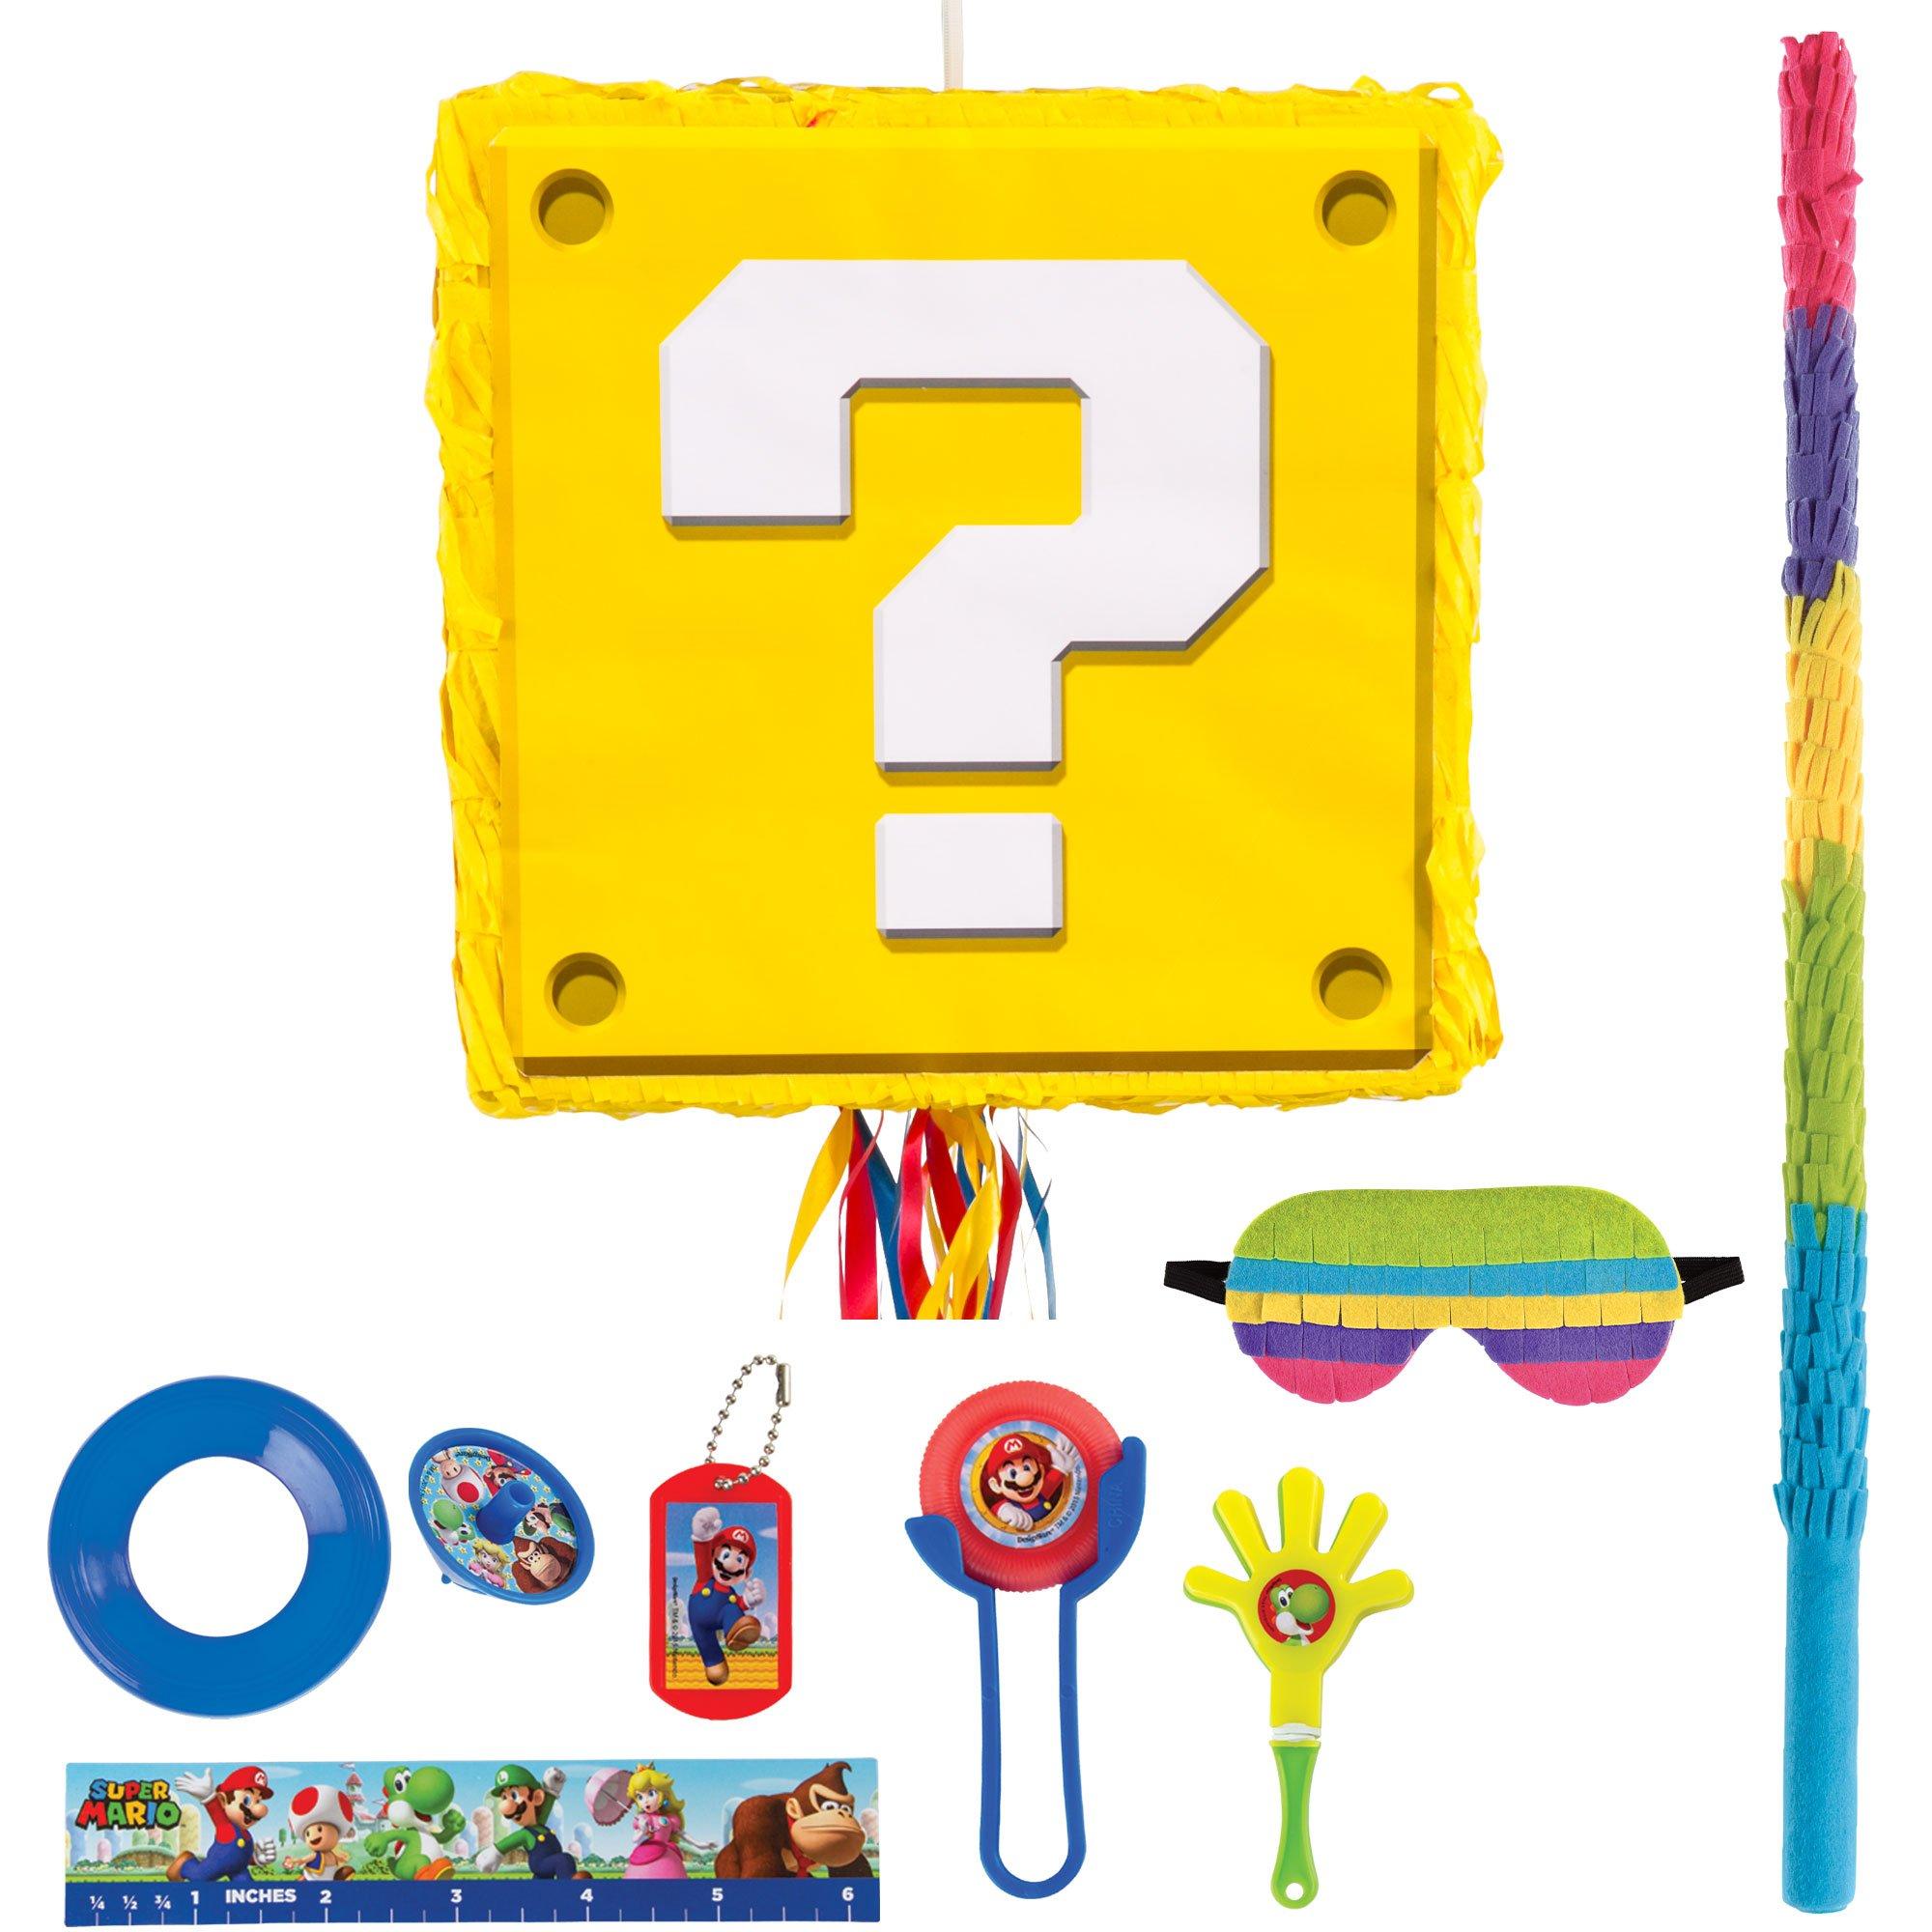 Pull String Question Block Pinata Kit with Favors - Super Mario